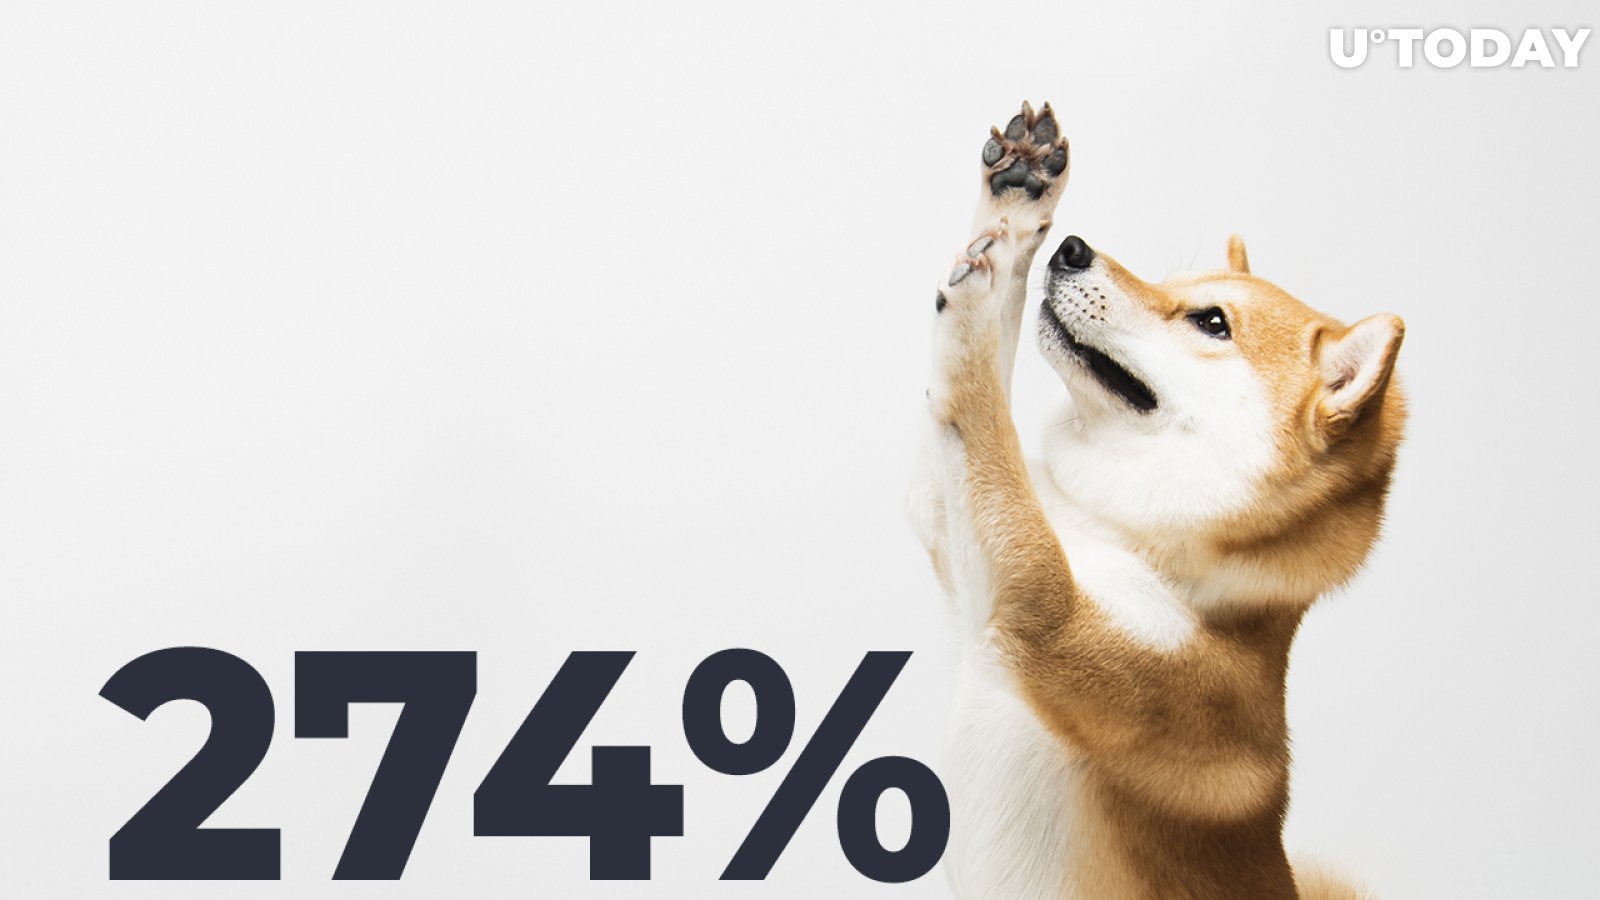 Shiba Inu Faces 274% Average Value Increase on Whale Wallets, Here's How